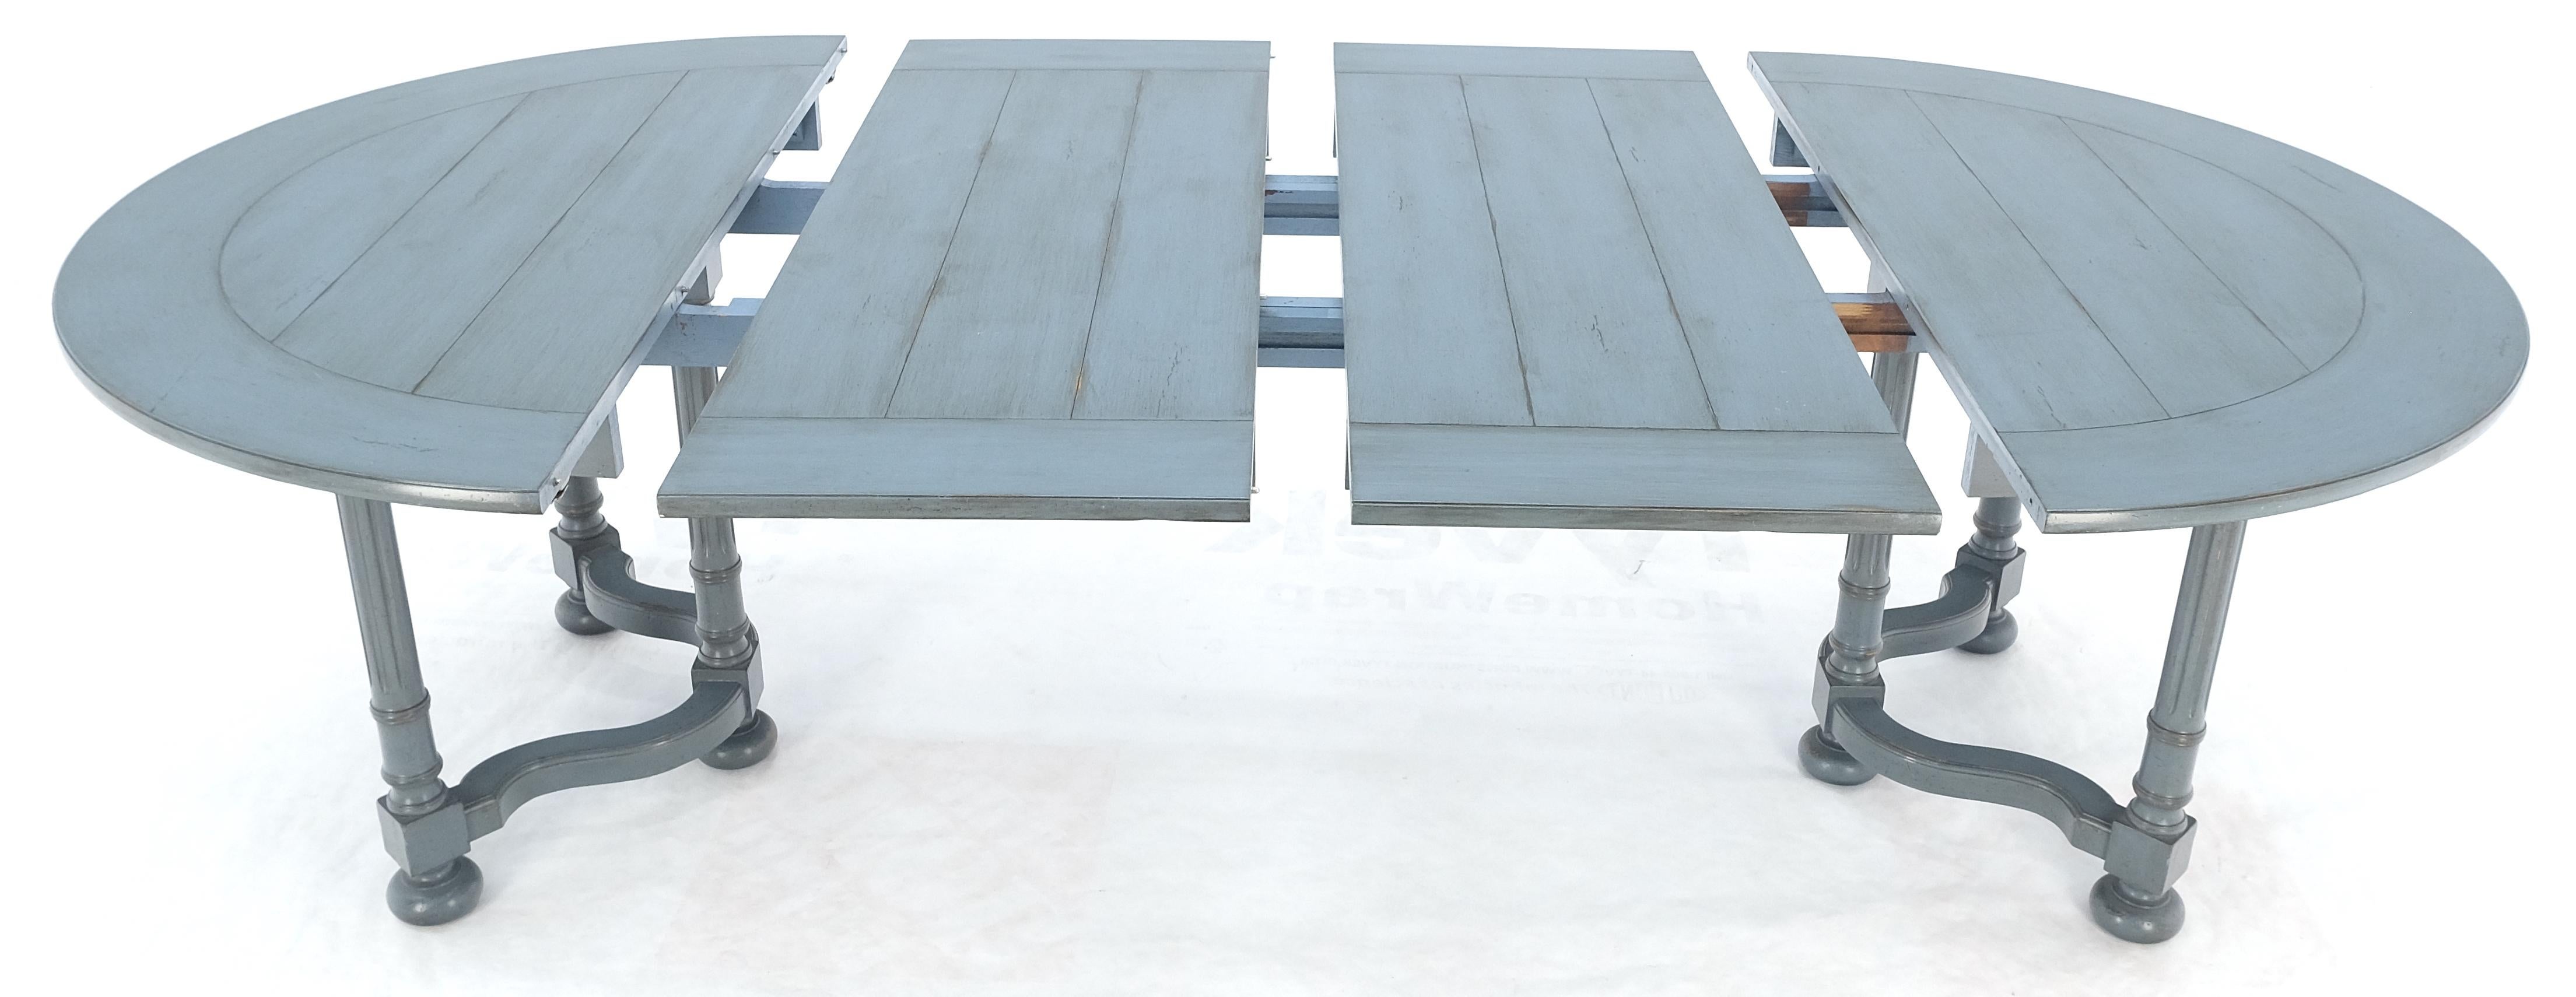 Baker Round Blue Grey Wash Milk Paint Style Finish Dining Table 2 Leaves MINT! For Sale 1